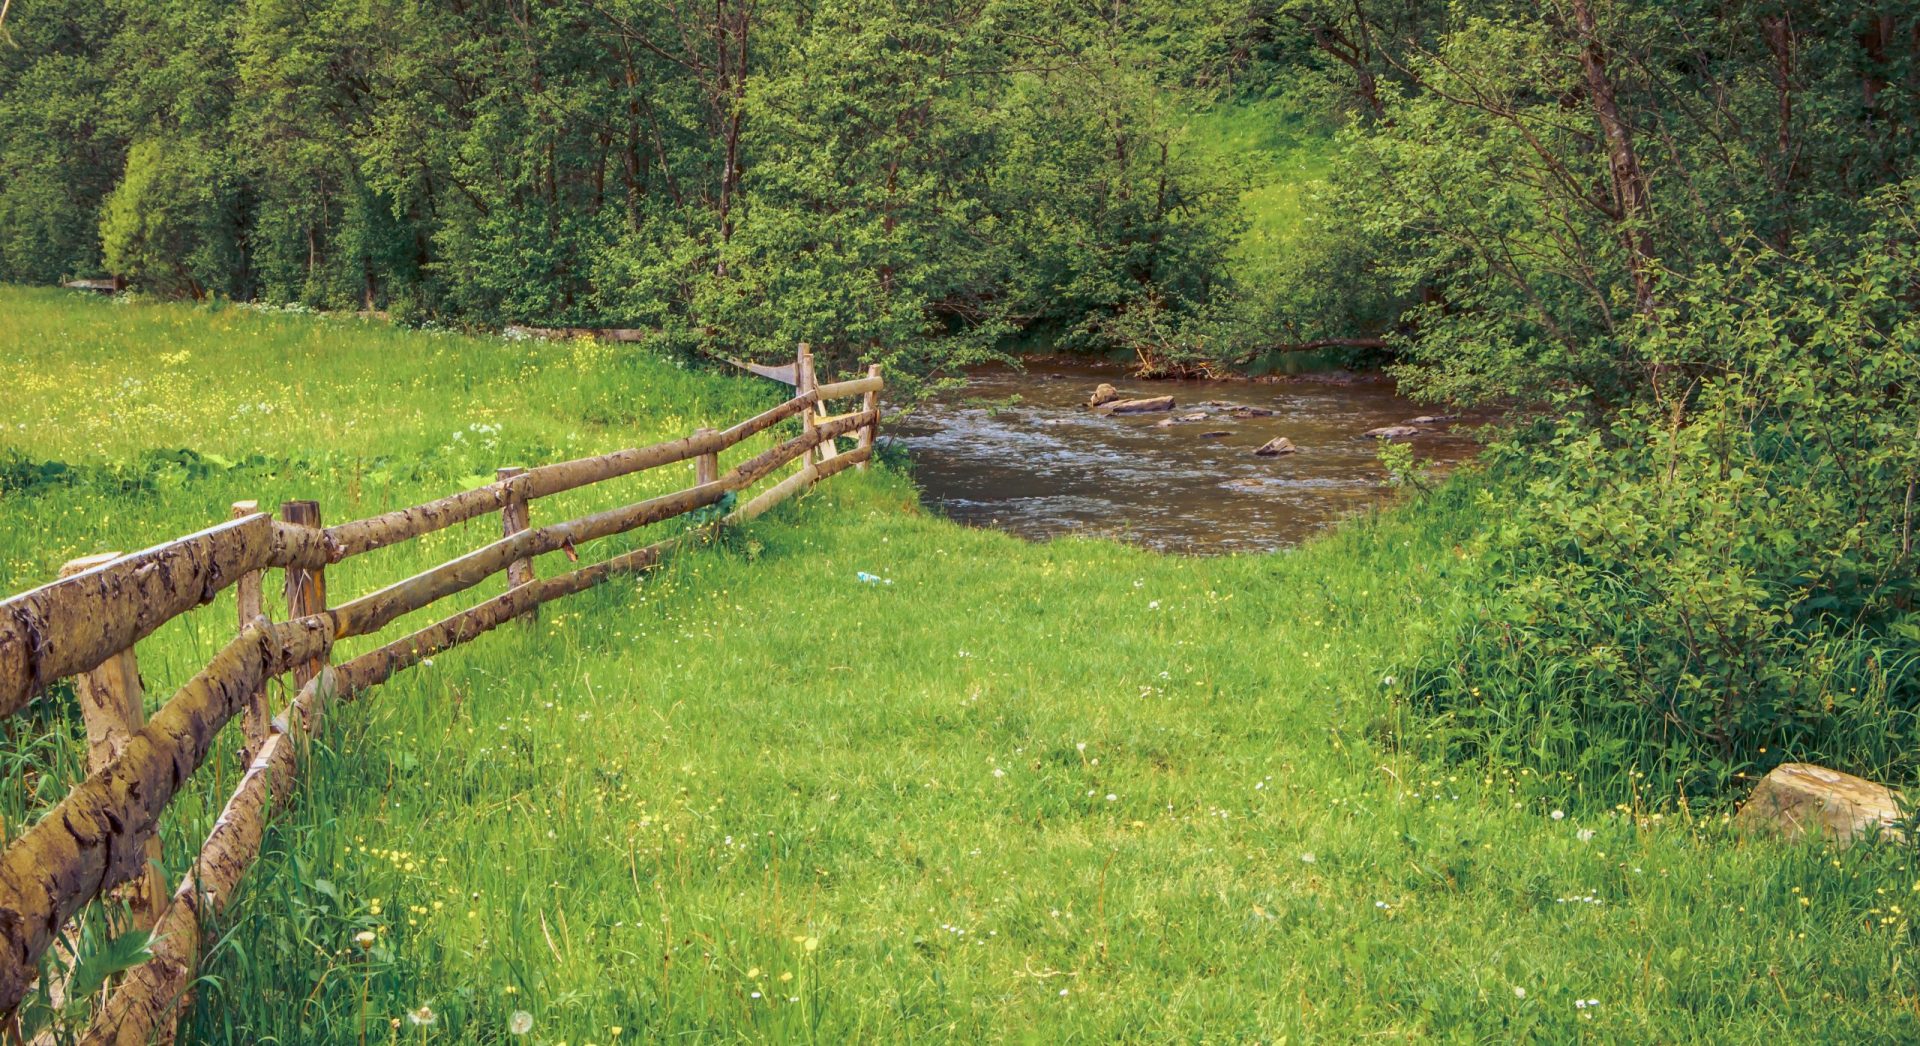 A green field with a wood fence and a small river in the background